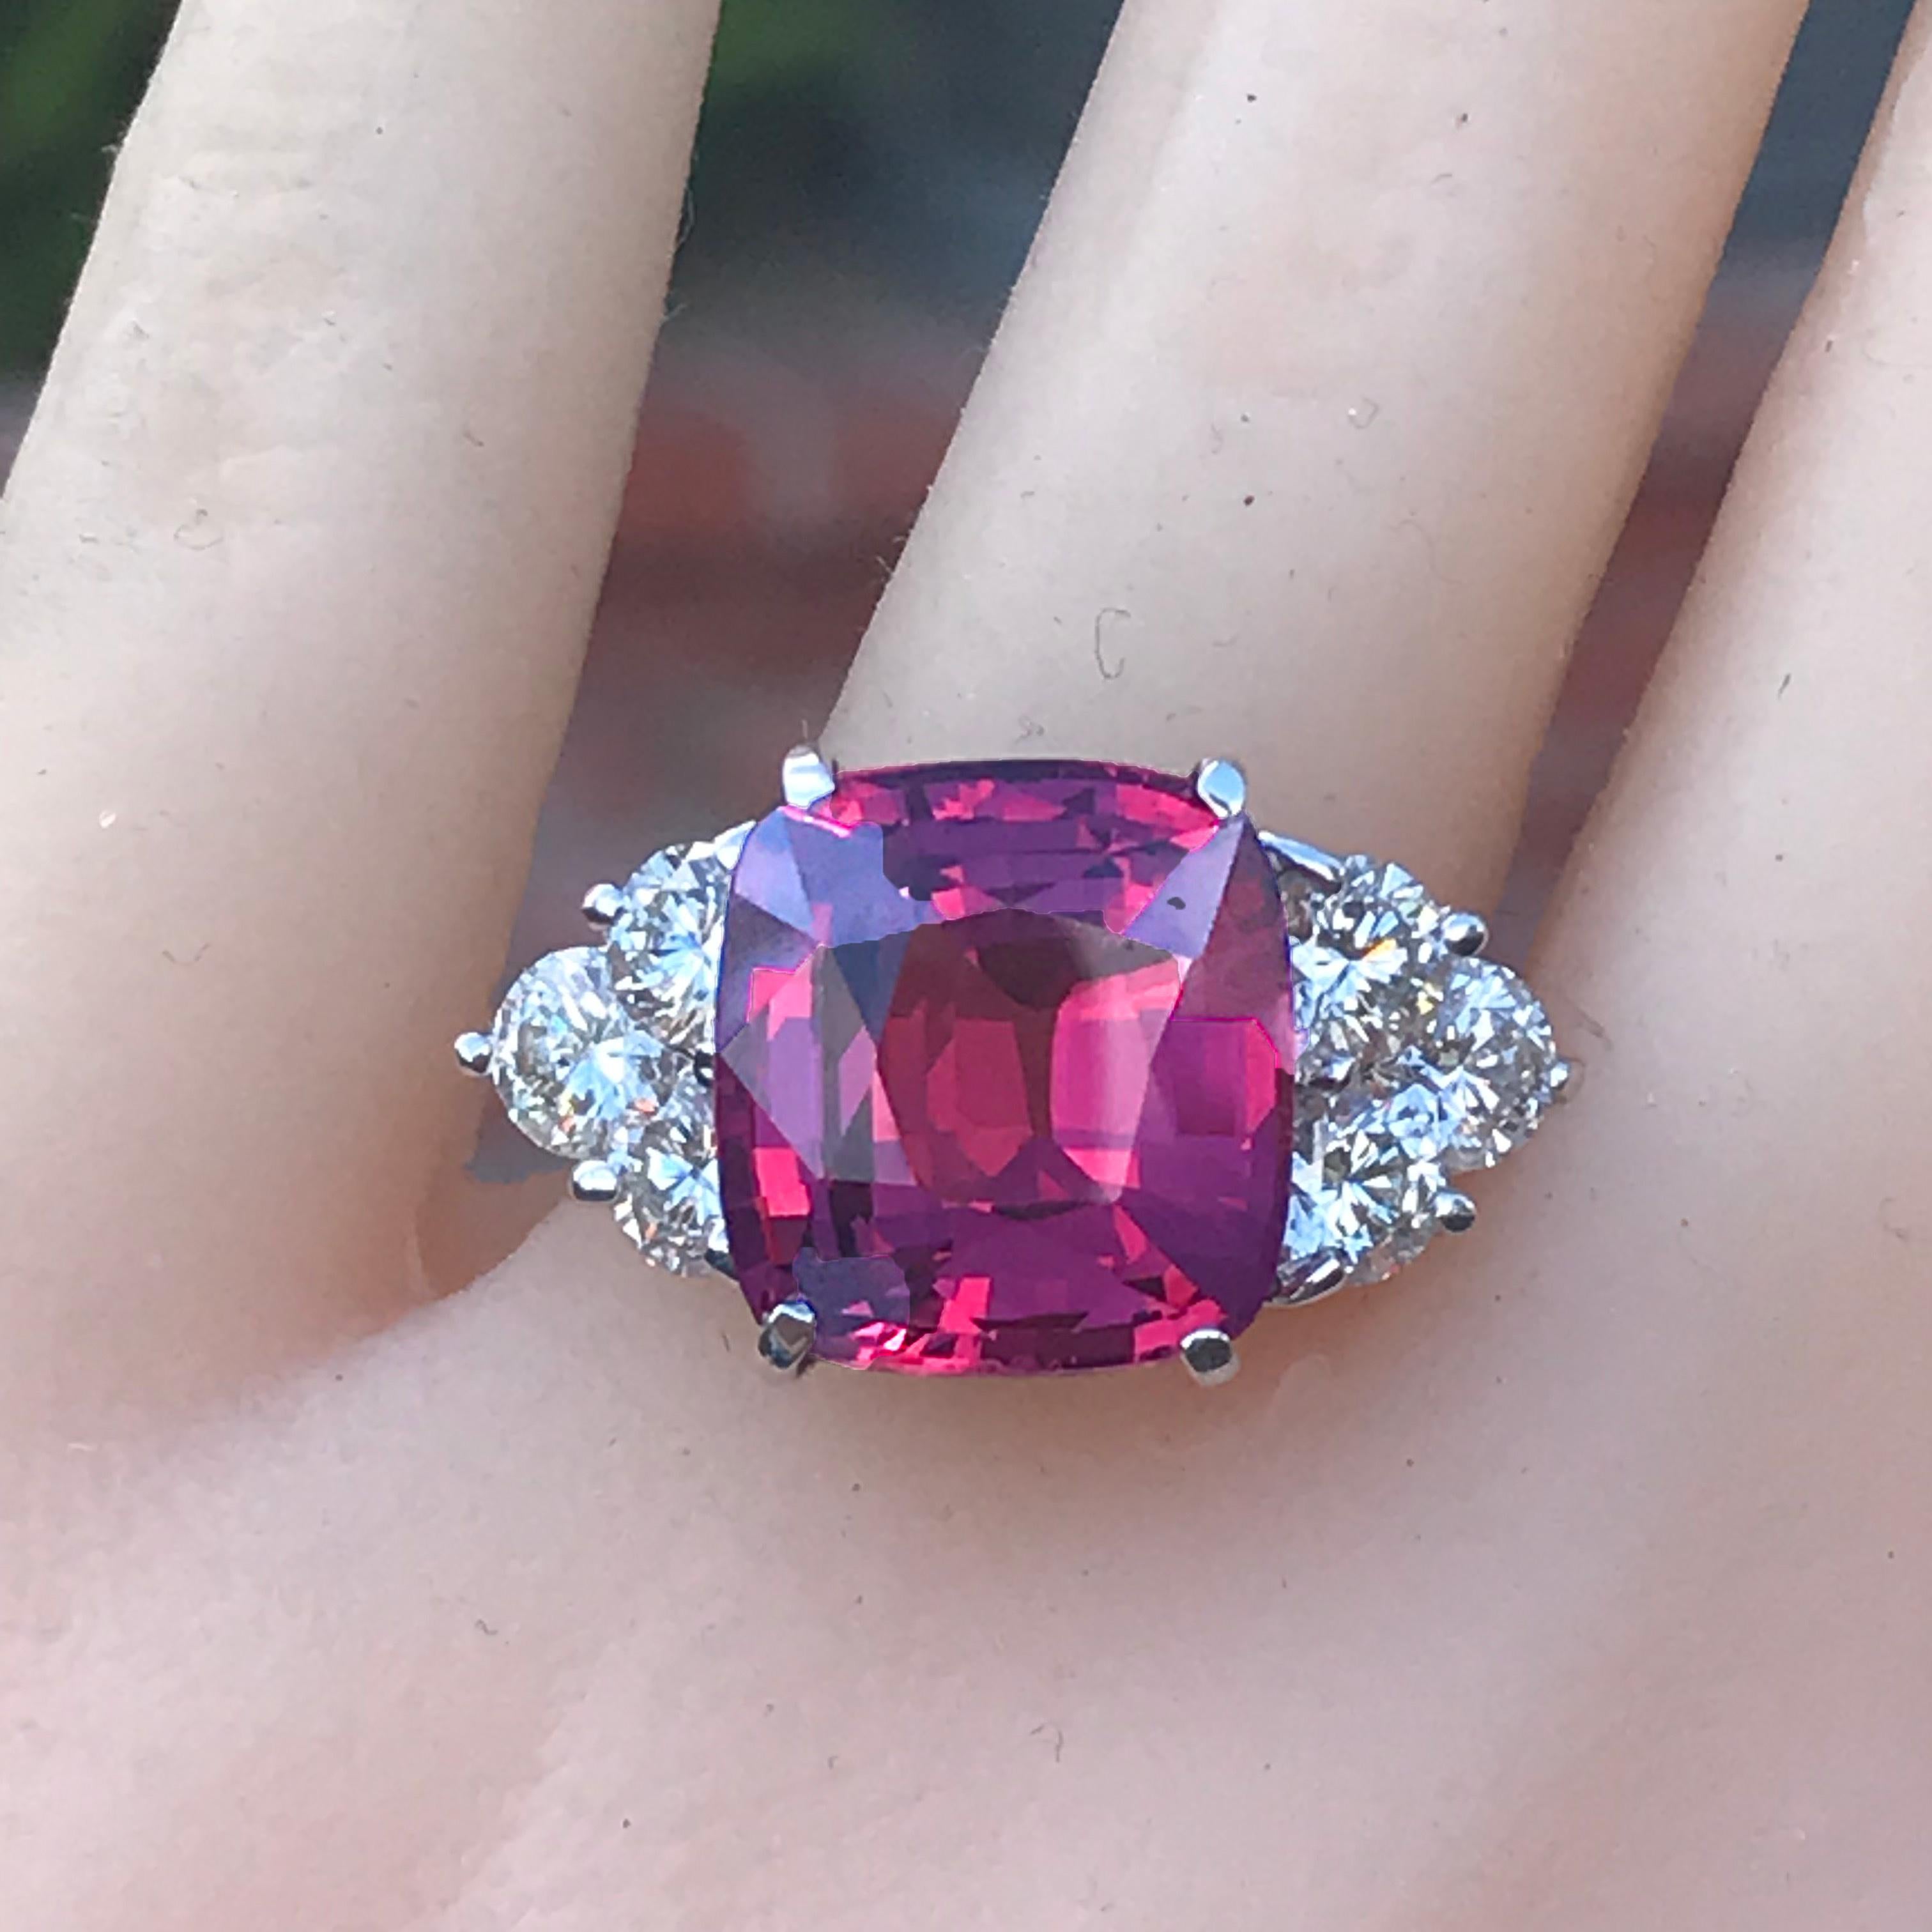 Selling a 10 CT+ TW Ct Cushion Natural Pink Spinel & Diamond Engagement Ring

1. Carat Weight: 8.2+ Carat Spinel

2. Color: Pink

3. Tone:  Medium - Nice, 8.0 Out of 10

4. Hue: Intense Pink.

3. Clarity:  Excellent clarity, no inclusions to the